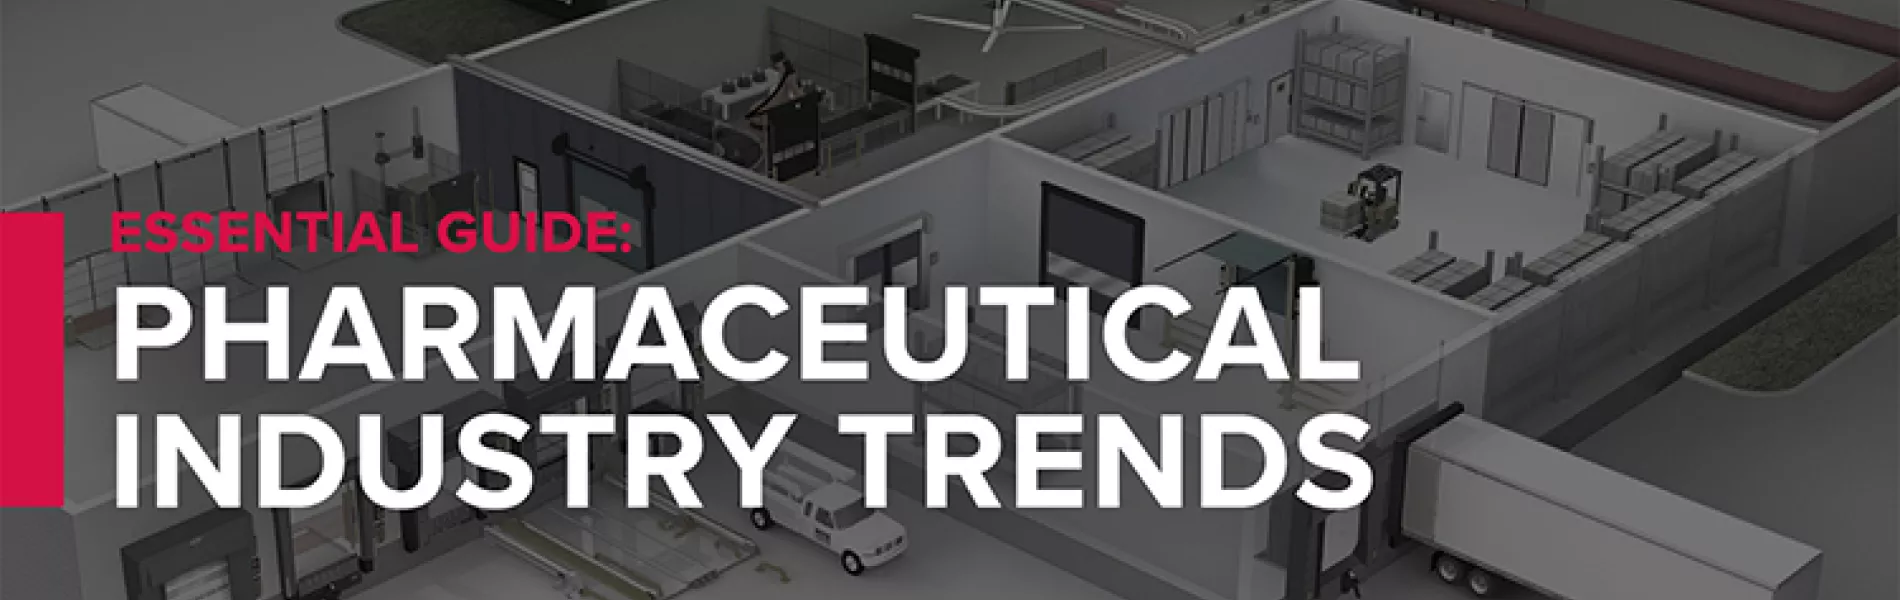 Pharmaceutical Industry Trends 